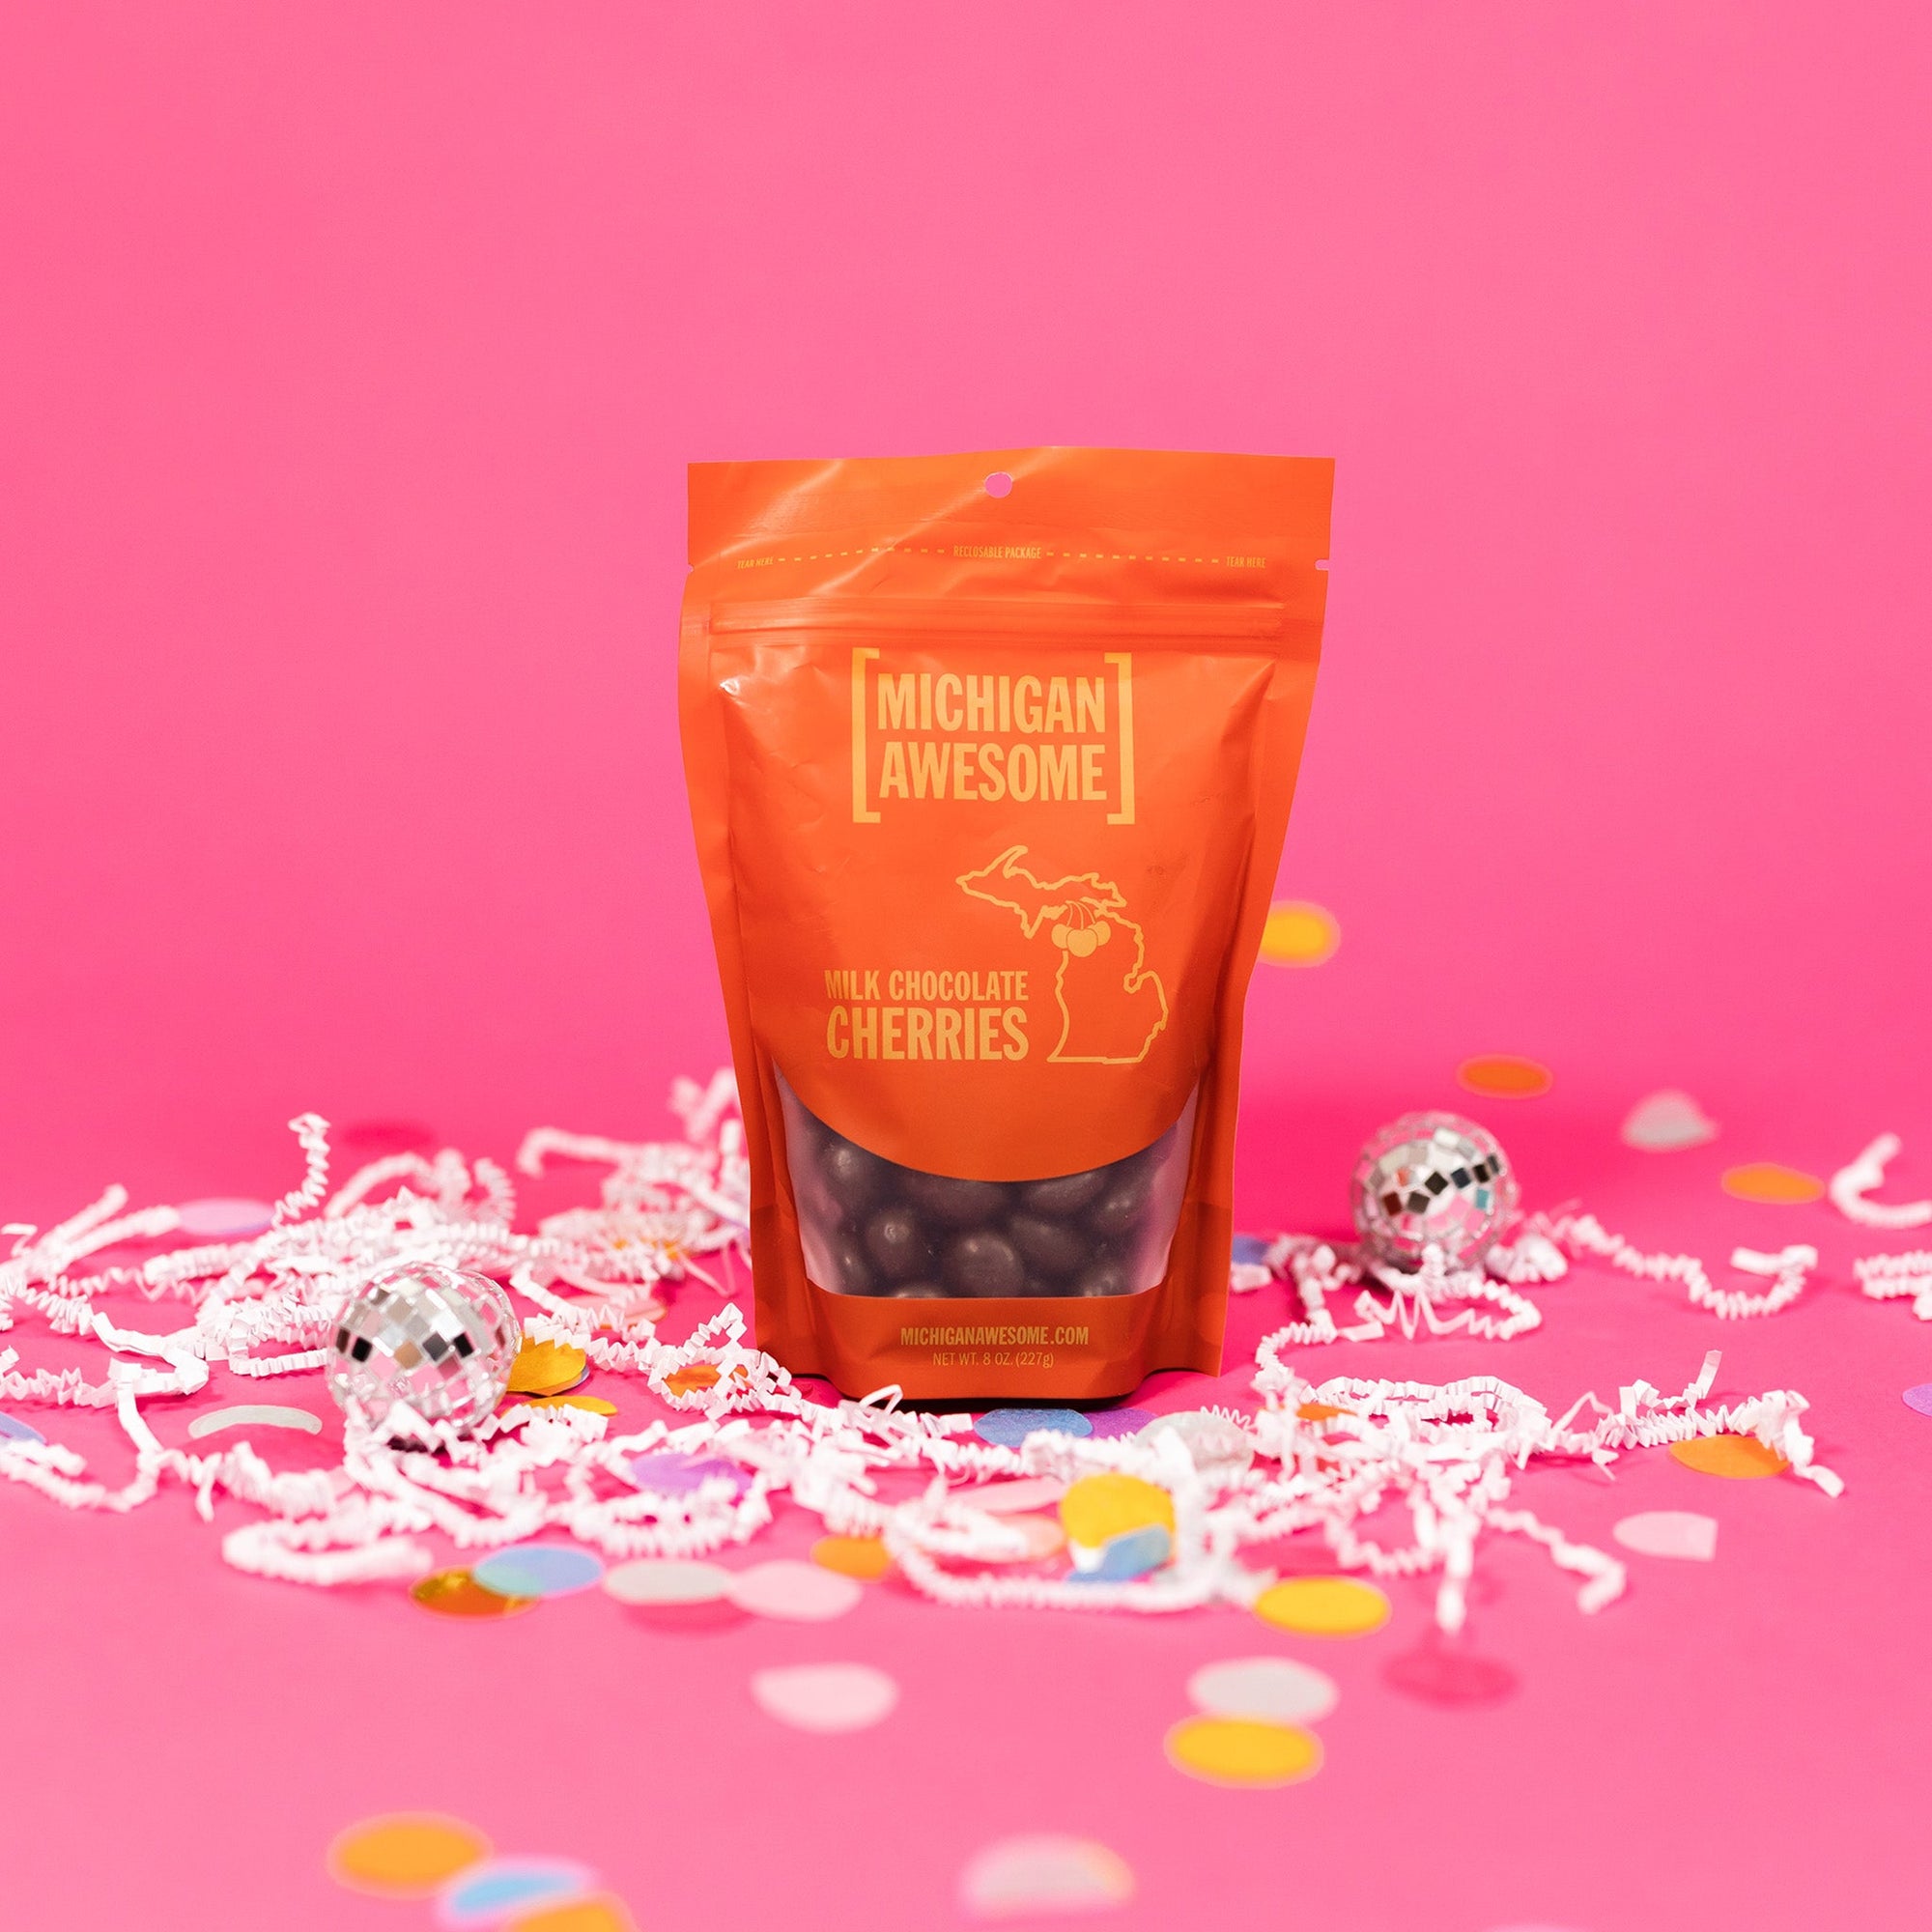 On a bubblegum pink background sits a bag with white crinkle and big, colorful confetti scattered around. There are mini disco balls. This red package has chocolate covered cherries in the package. It says in gold "MICHIGAN AWESOME," "MILK CHOCOLATE CHERRIES" in all caps block font. It also says "MICHIGANAWESOME.COM" in gold, all caps block font. NEW WT. 8 OZ. (227g)